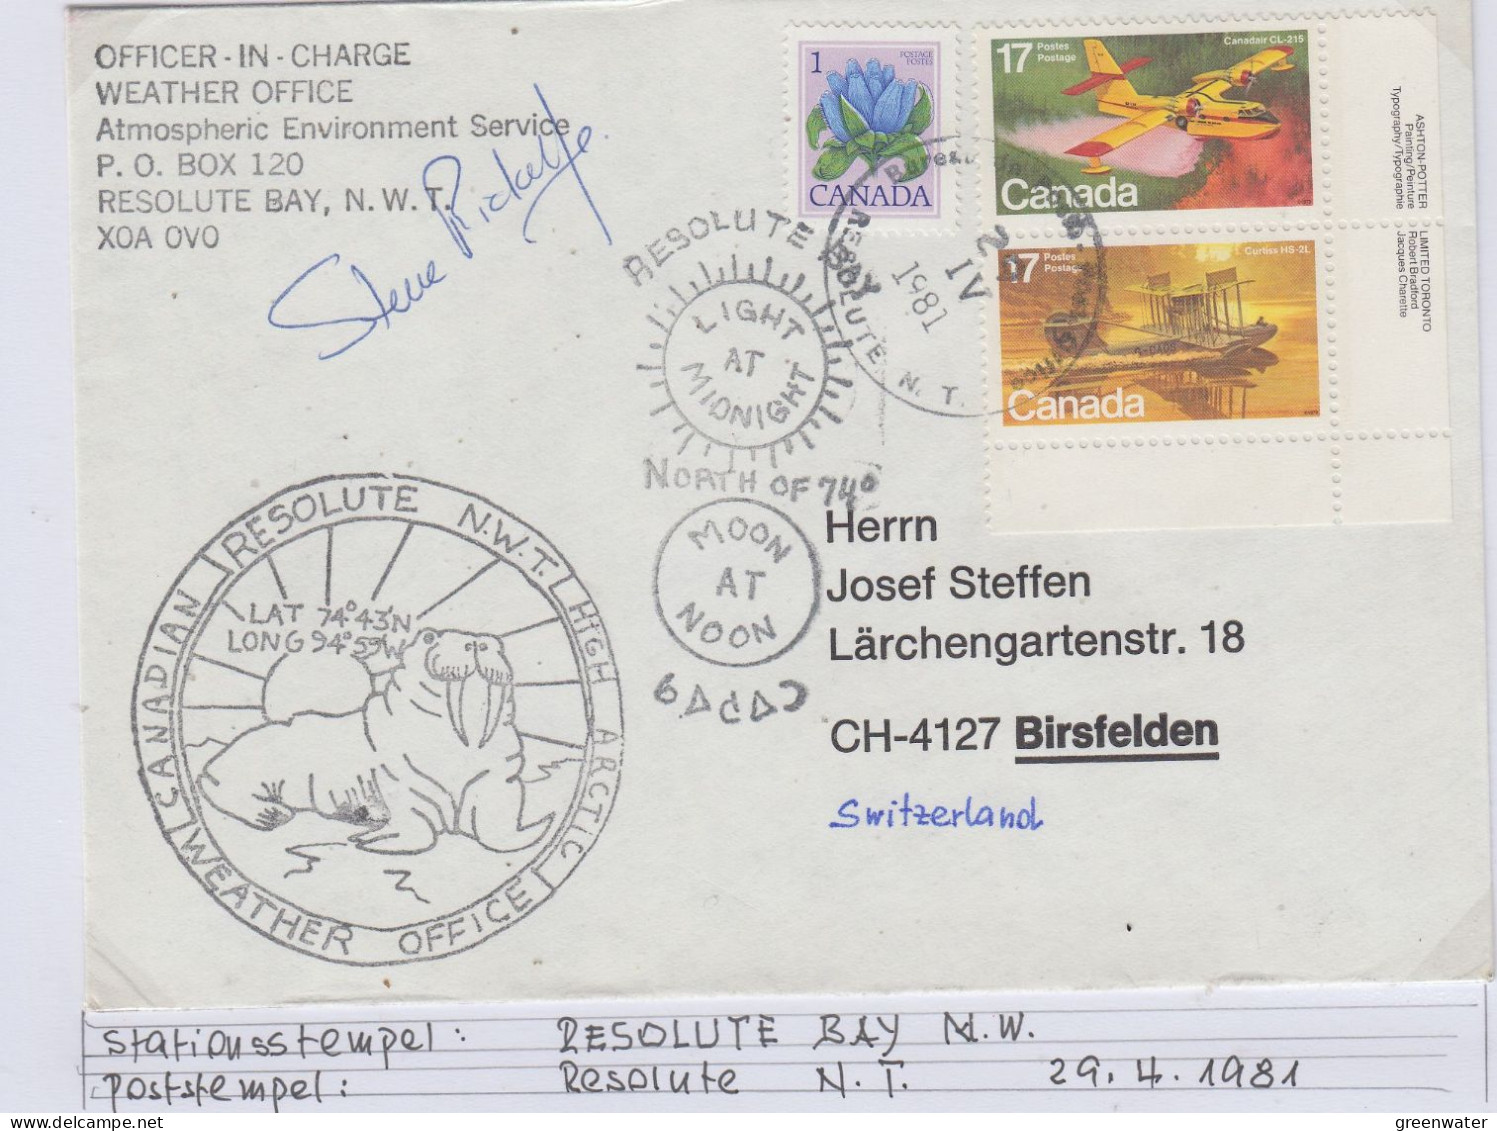 Canada Resolute Bay Weather Office Signature Officer In Charge Ca Resolute 29.4.1981 (BS179A) - Forschungsstationen & Arctic Driftstationen